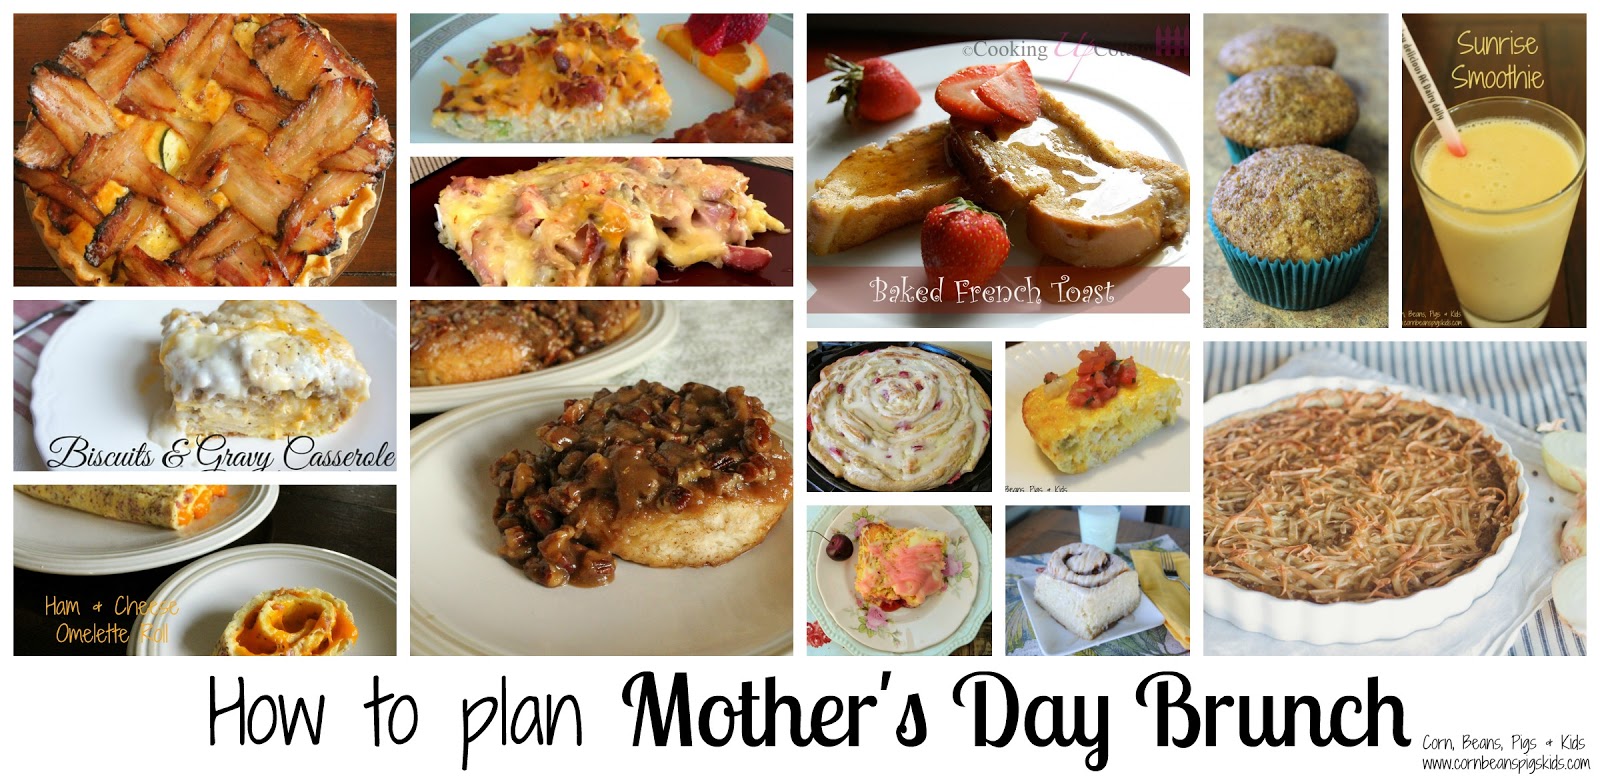 Corn, Beans, Pigs and Kids: How to plan Mother's Day Brunch